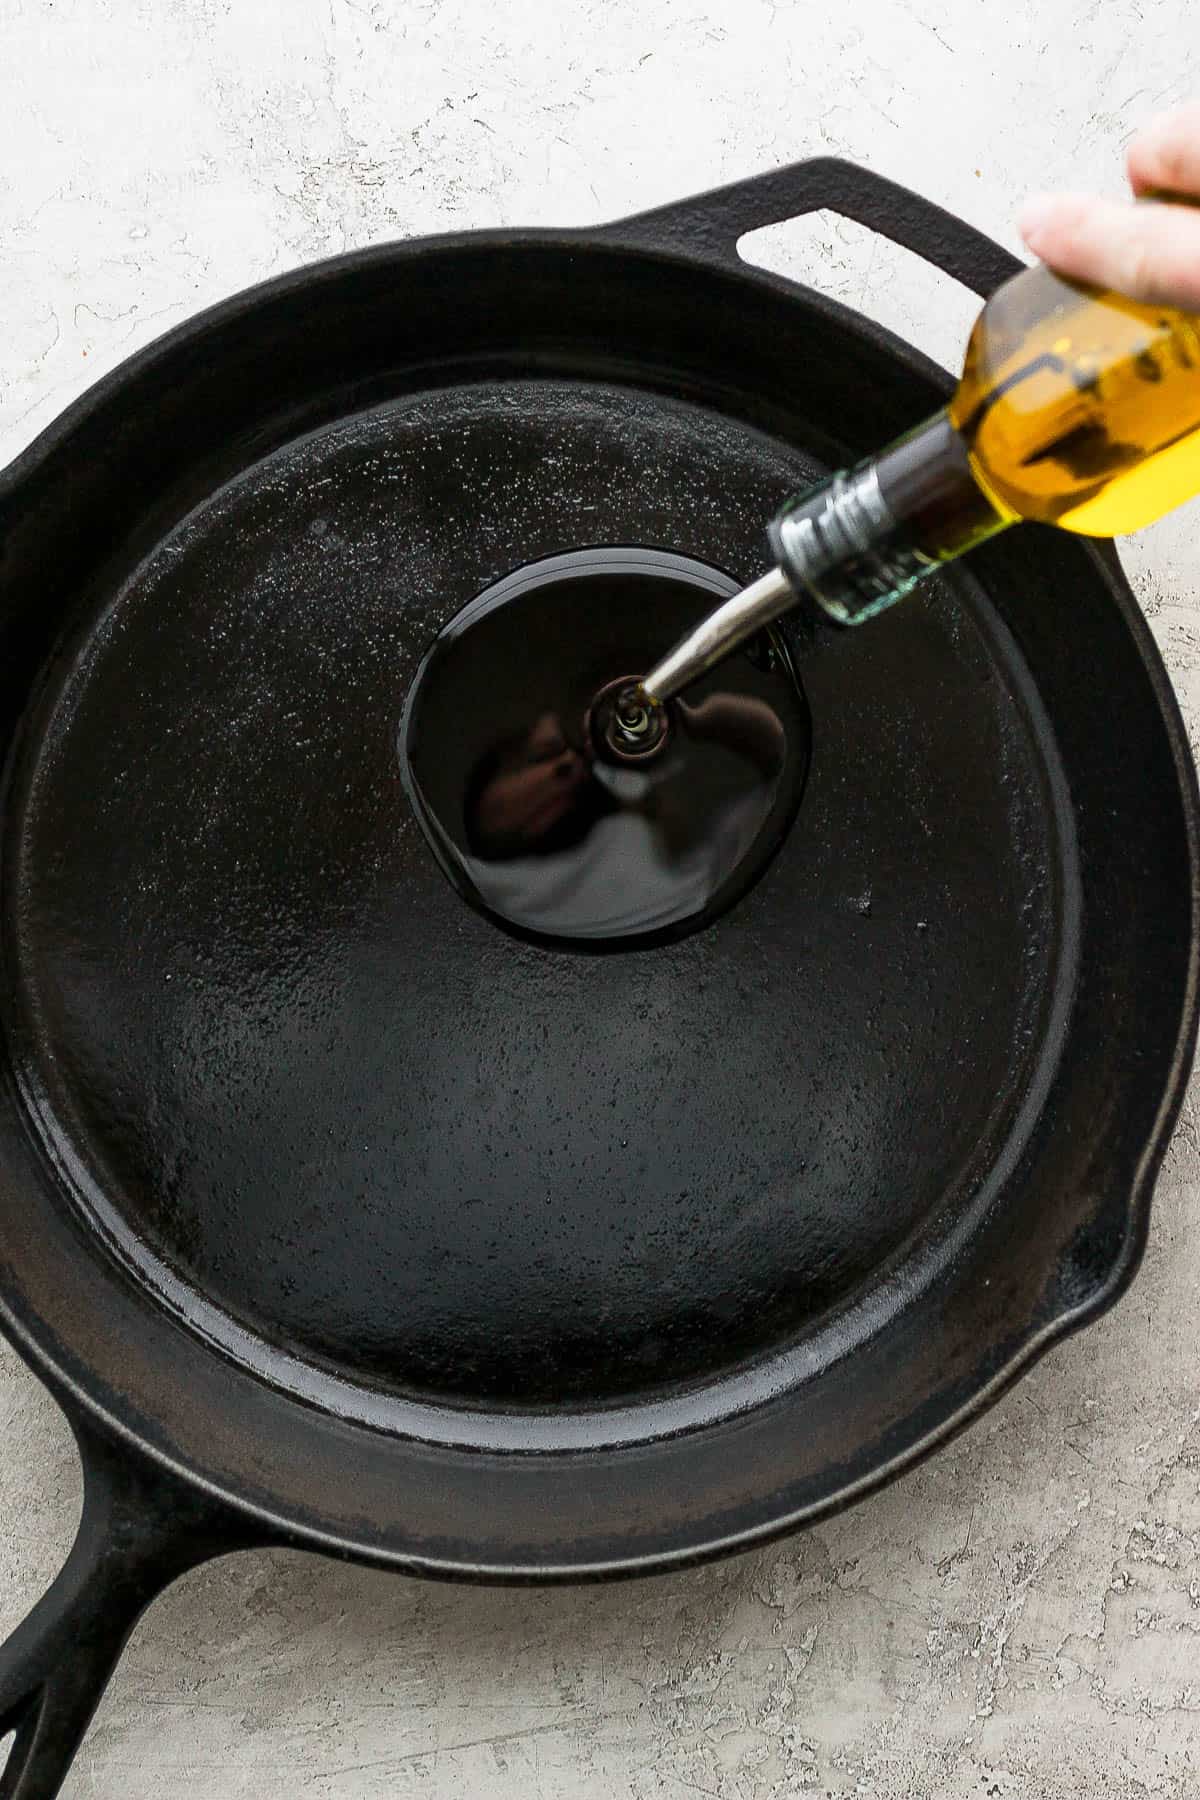 Olive oil being pouring into a large skillet.